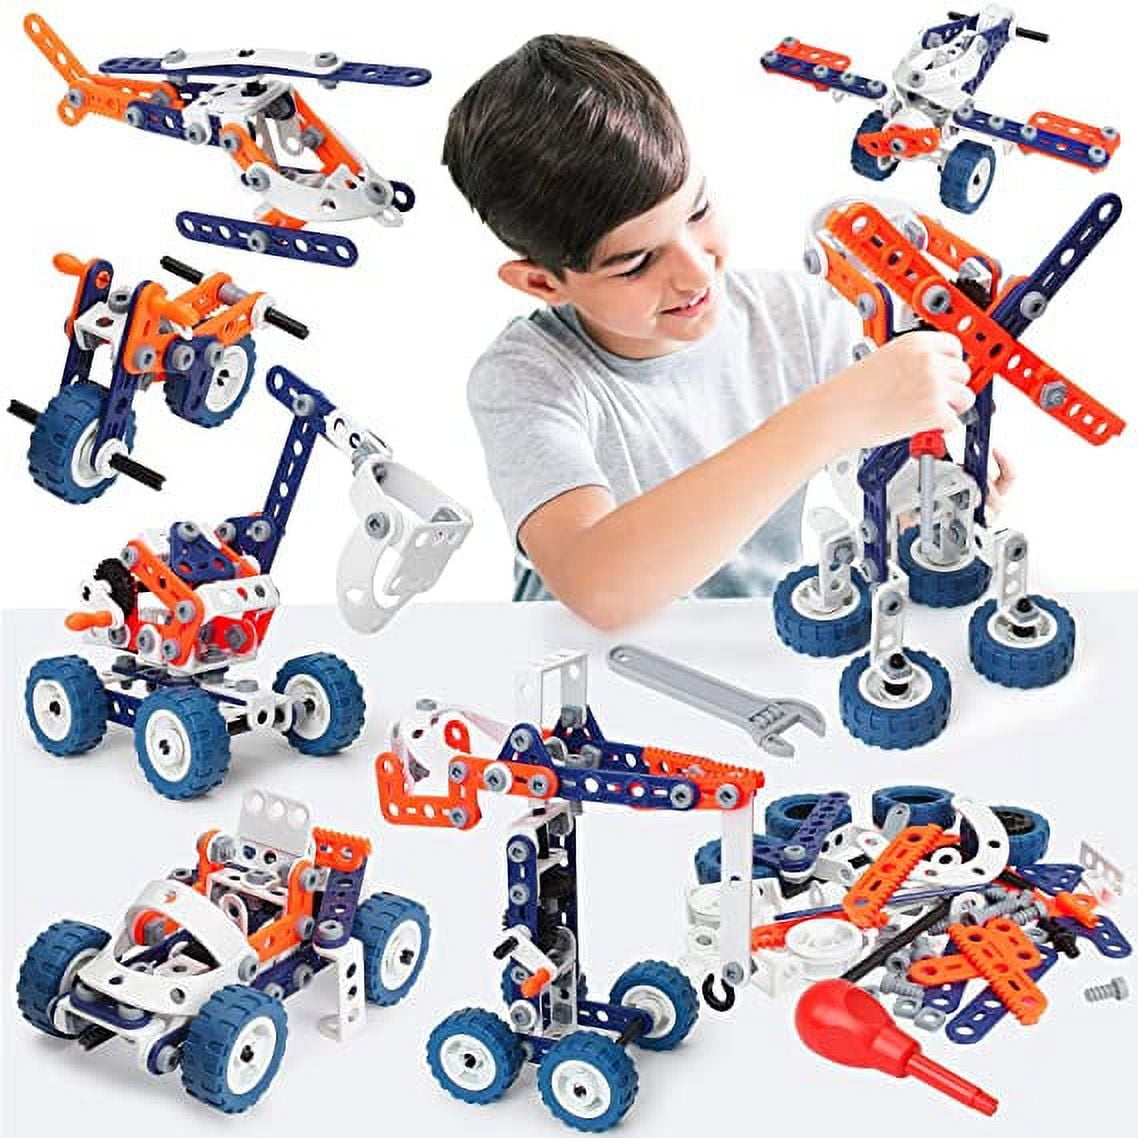 Building Toys for Kids, Erector Set for Boys 6-8, 152PCS DIY 12 in 1 STEM  Toys for 6 7 8 9 Year Old Boy, Educational Construction Learning Toy for  Age